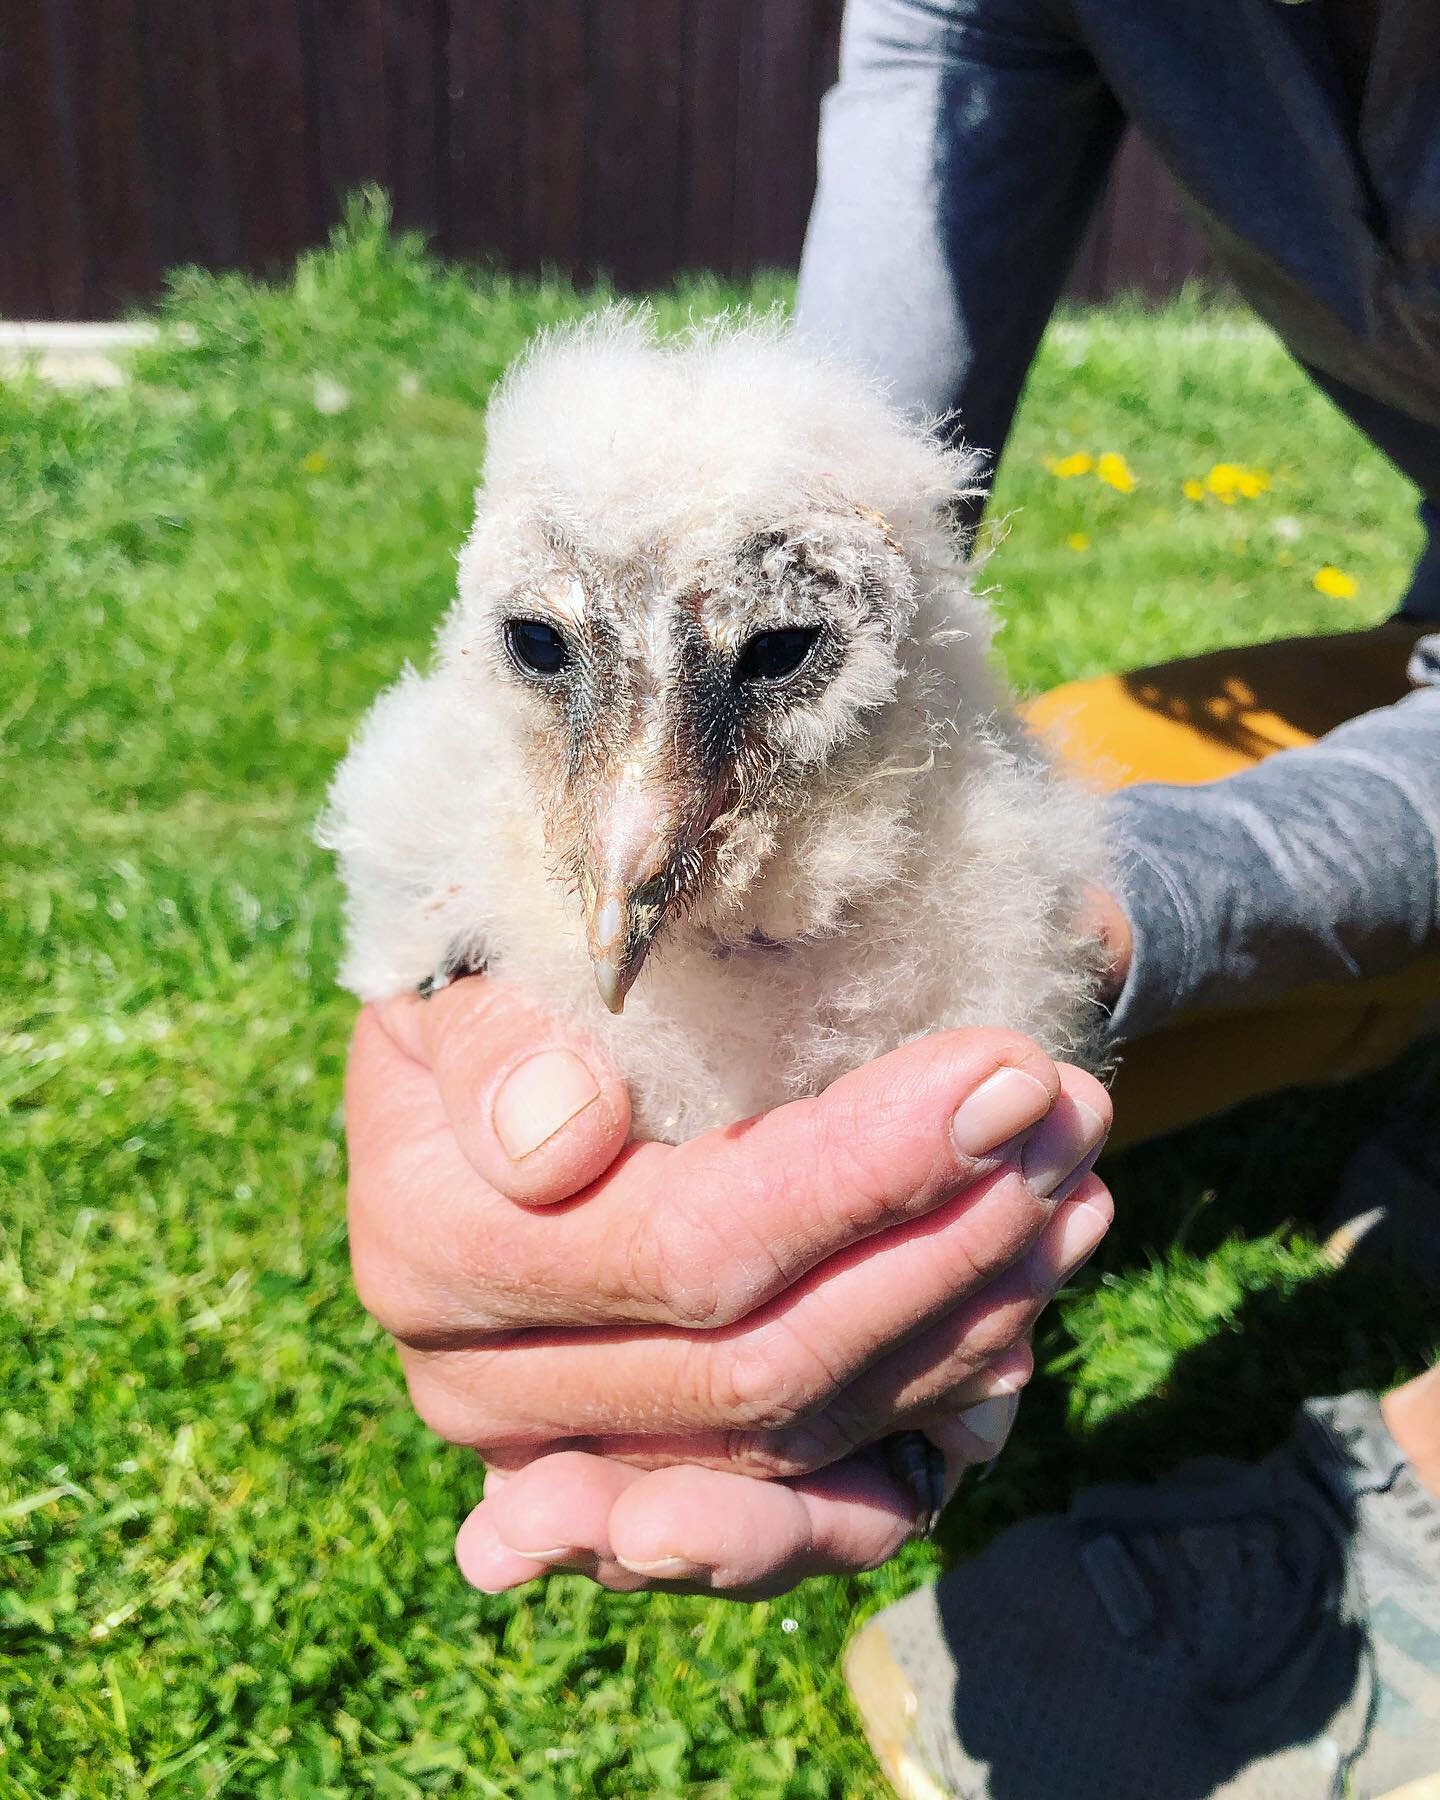 As winter&rsquo;s slowly but inexorably approaching, it&rsquo;s time to reflect on the part of the year we love the most - spring months. This year, it brought us more than 30 feathery babies. Can you guess which one is this? 🐣

#penthea #pentheapra